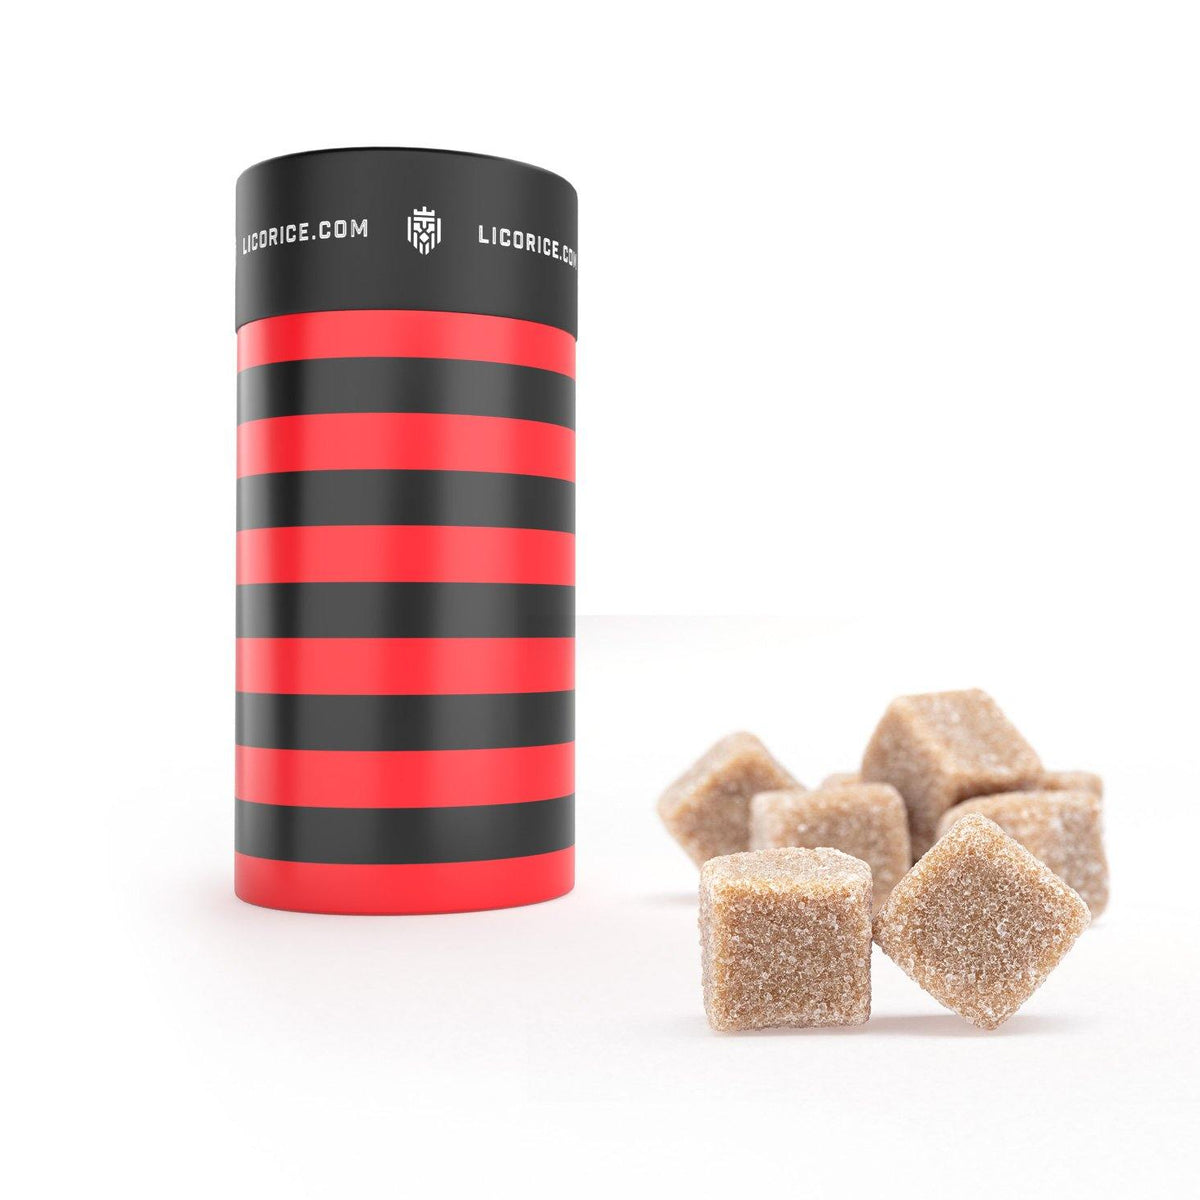 The perfect balance of sweet and savory, this licorice is truly irresistible.